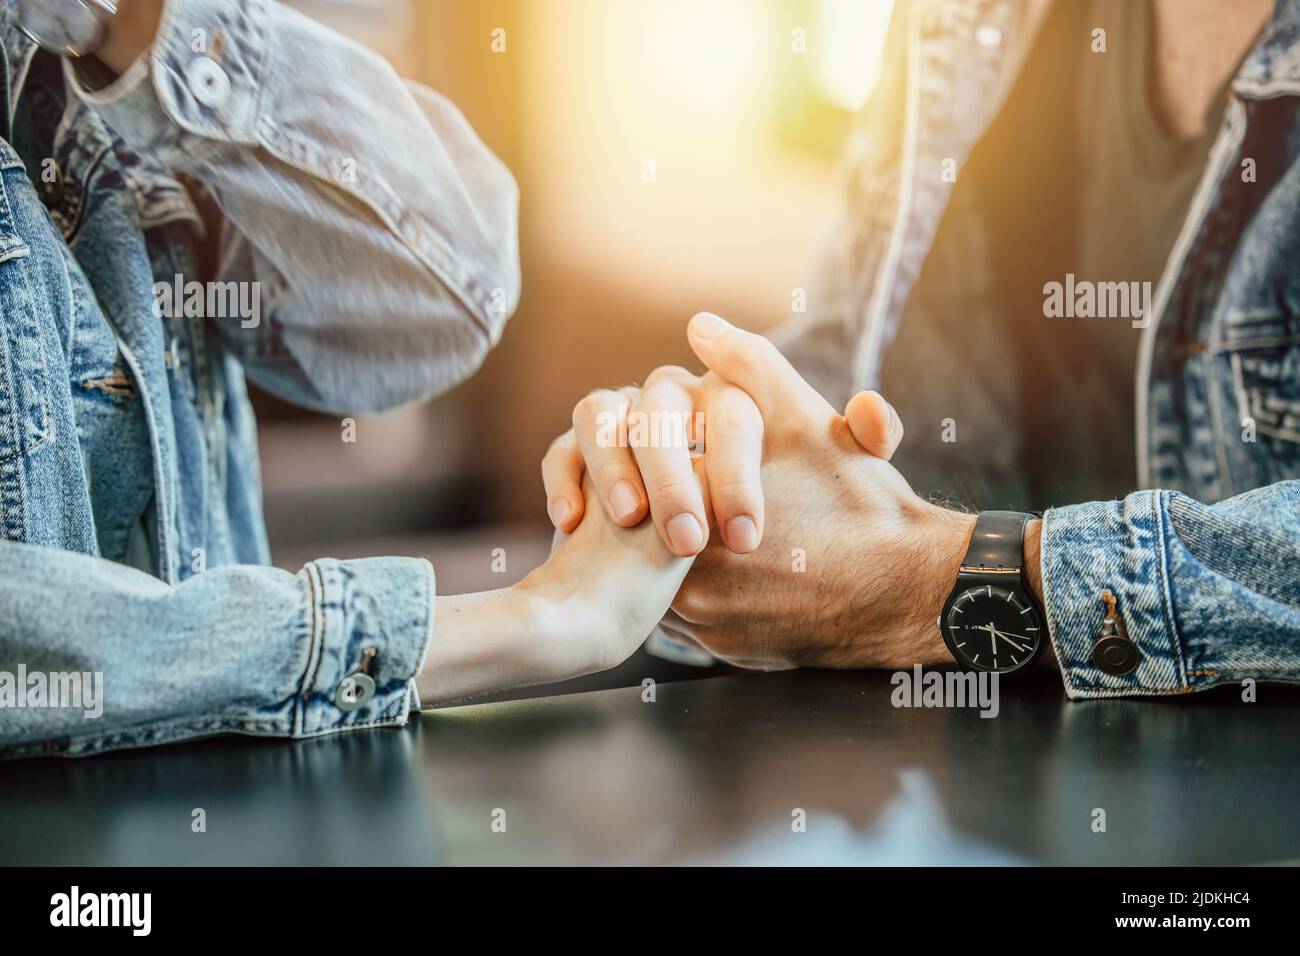 Couple Lover Hand Holding Together ask for Marriage. People Dating for Relationship Help Support Consoling and Care. Stock Photo